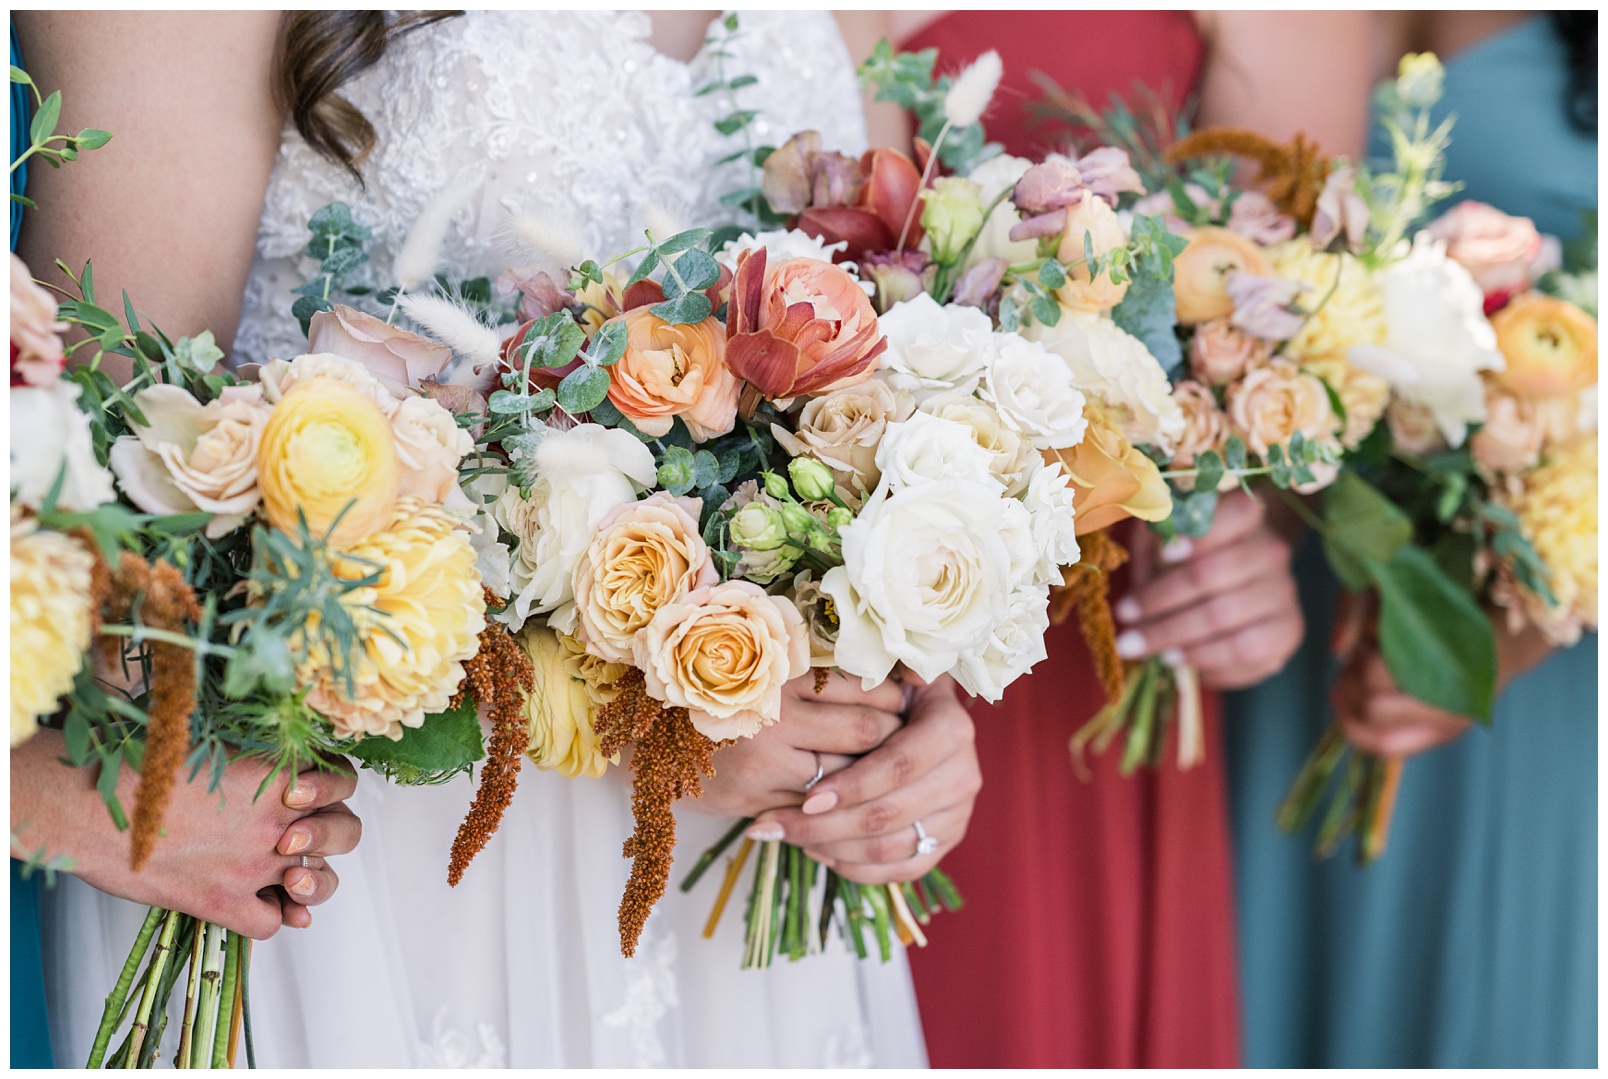 Sixpence Floral Wedding Florist in Austin Texas